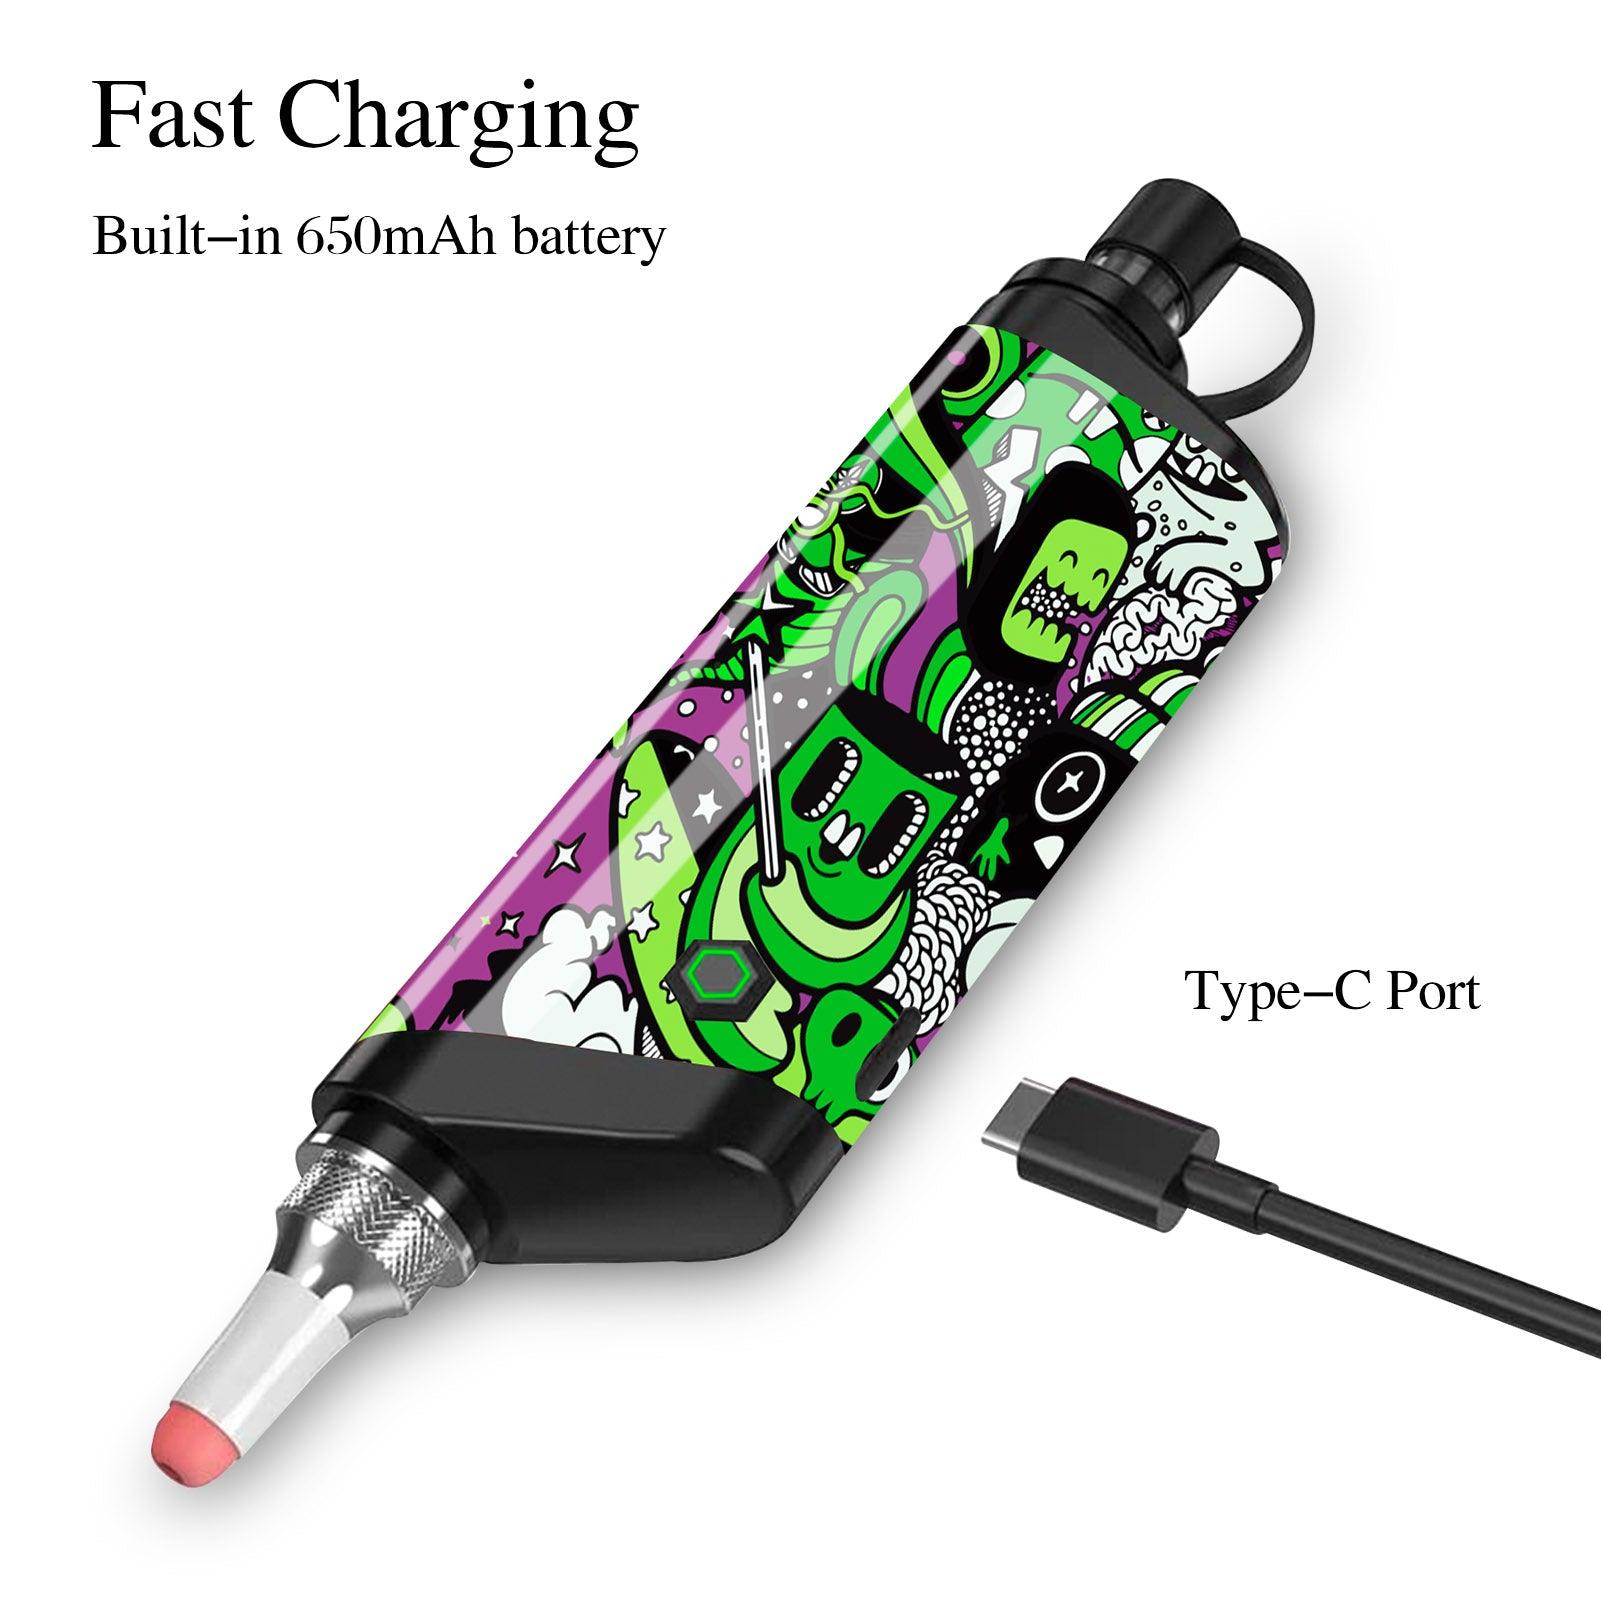 THE UDIP Electric Nectar collector,Electric Dab Pen Kit - iVapebest